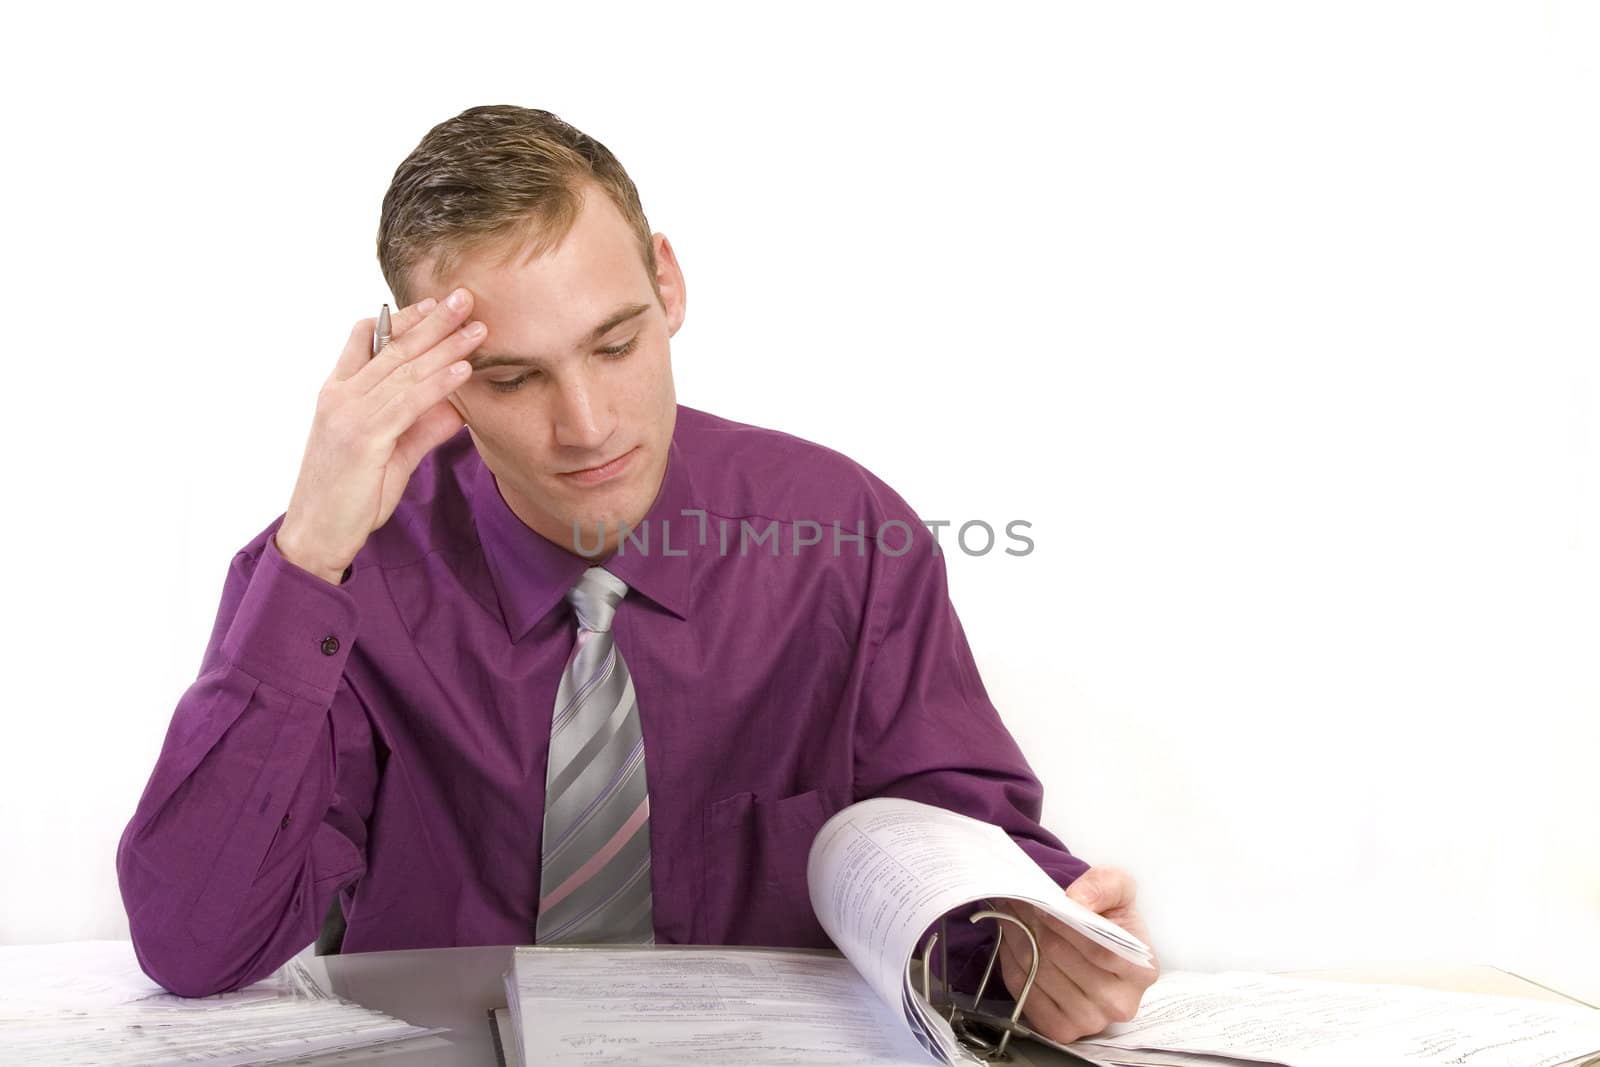 Businessman at his desk in the office thinks. He looks worried while on a file folder. 